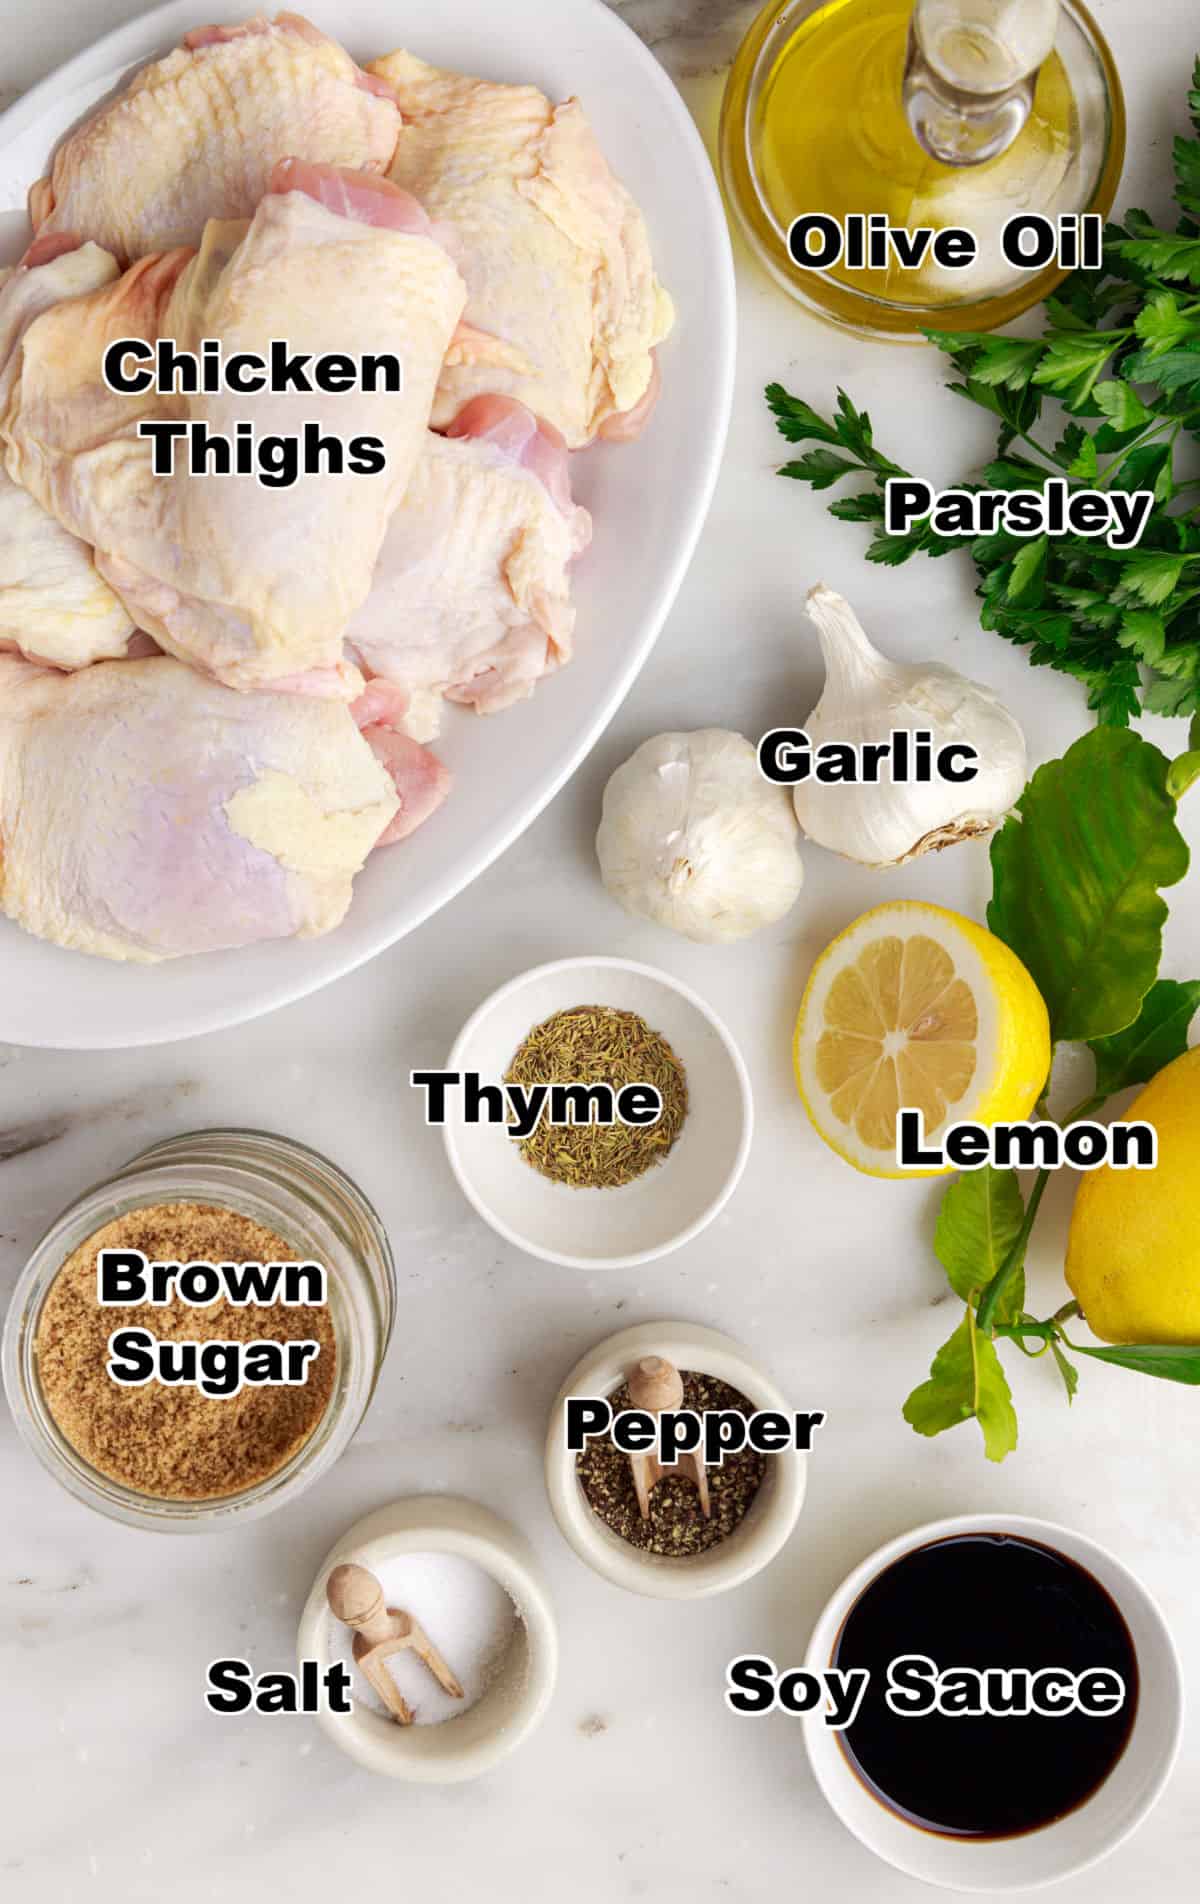 All the ingredients needed.